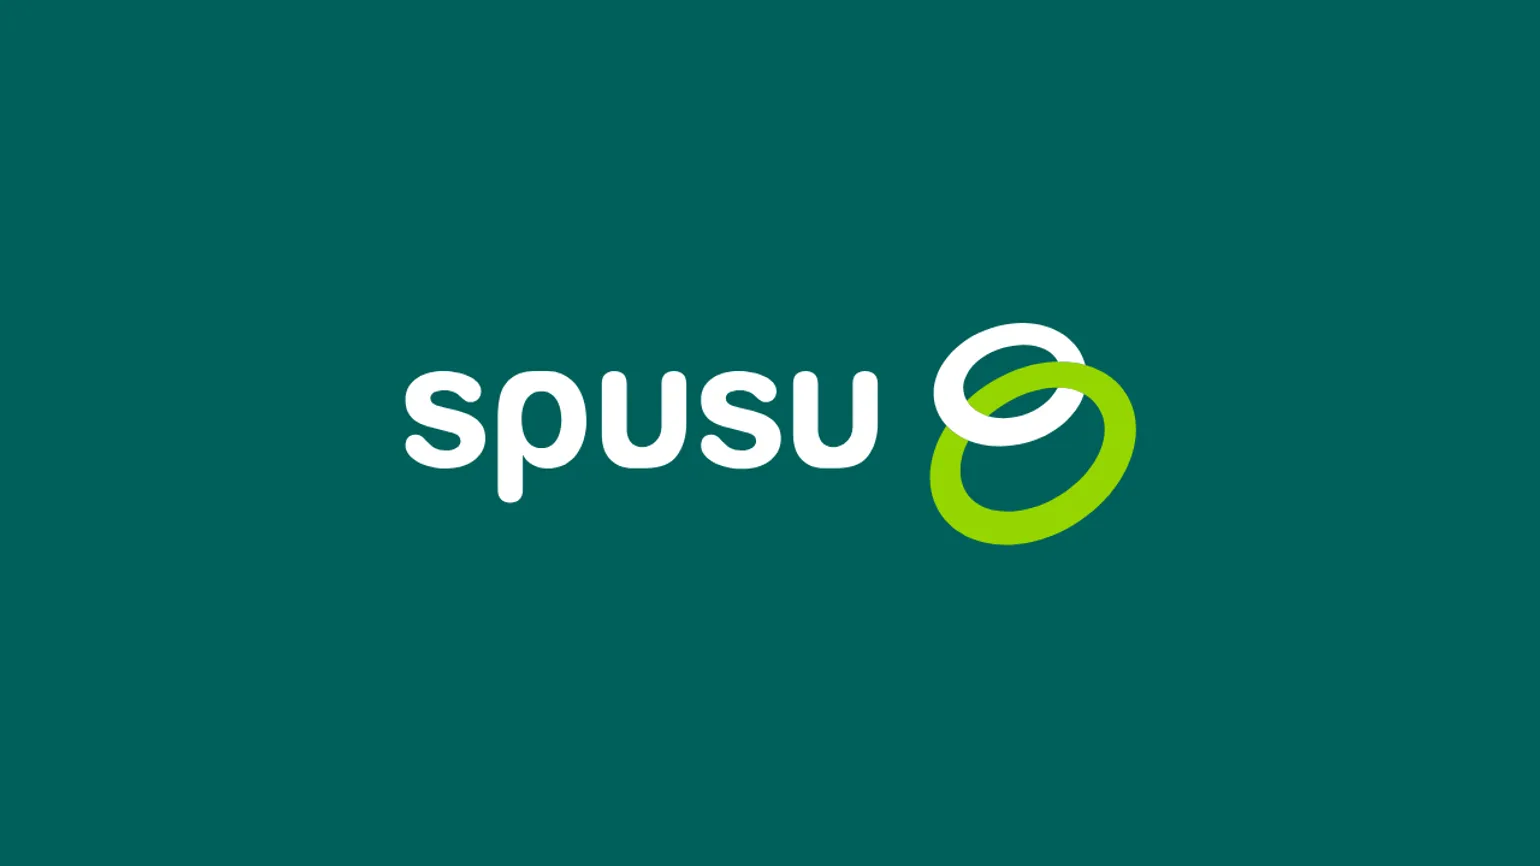 spusu review - a new MVNO powered by EE